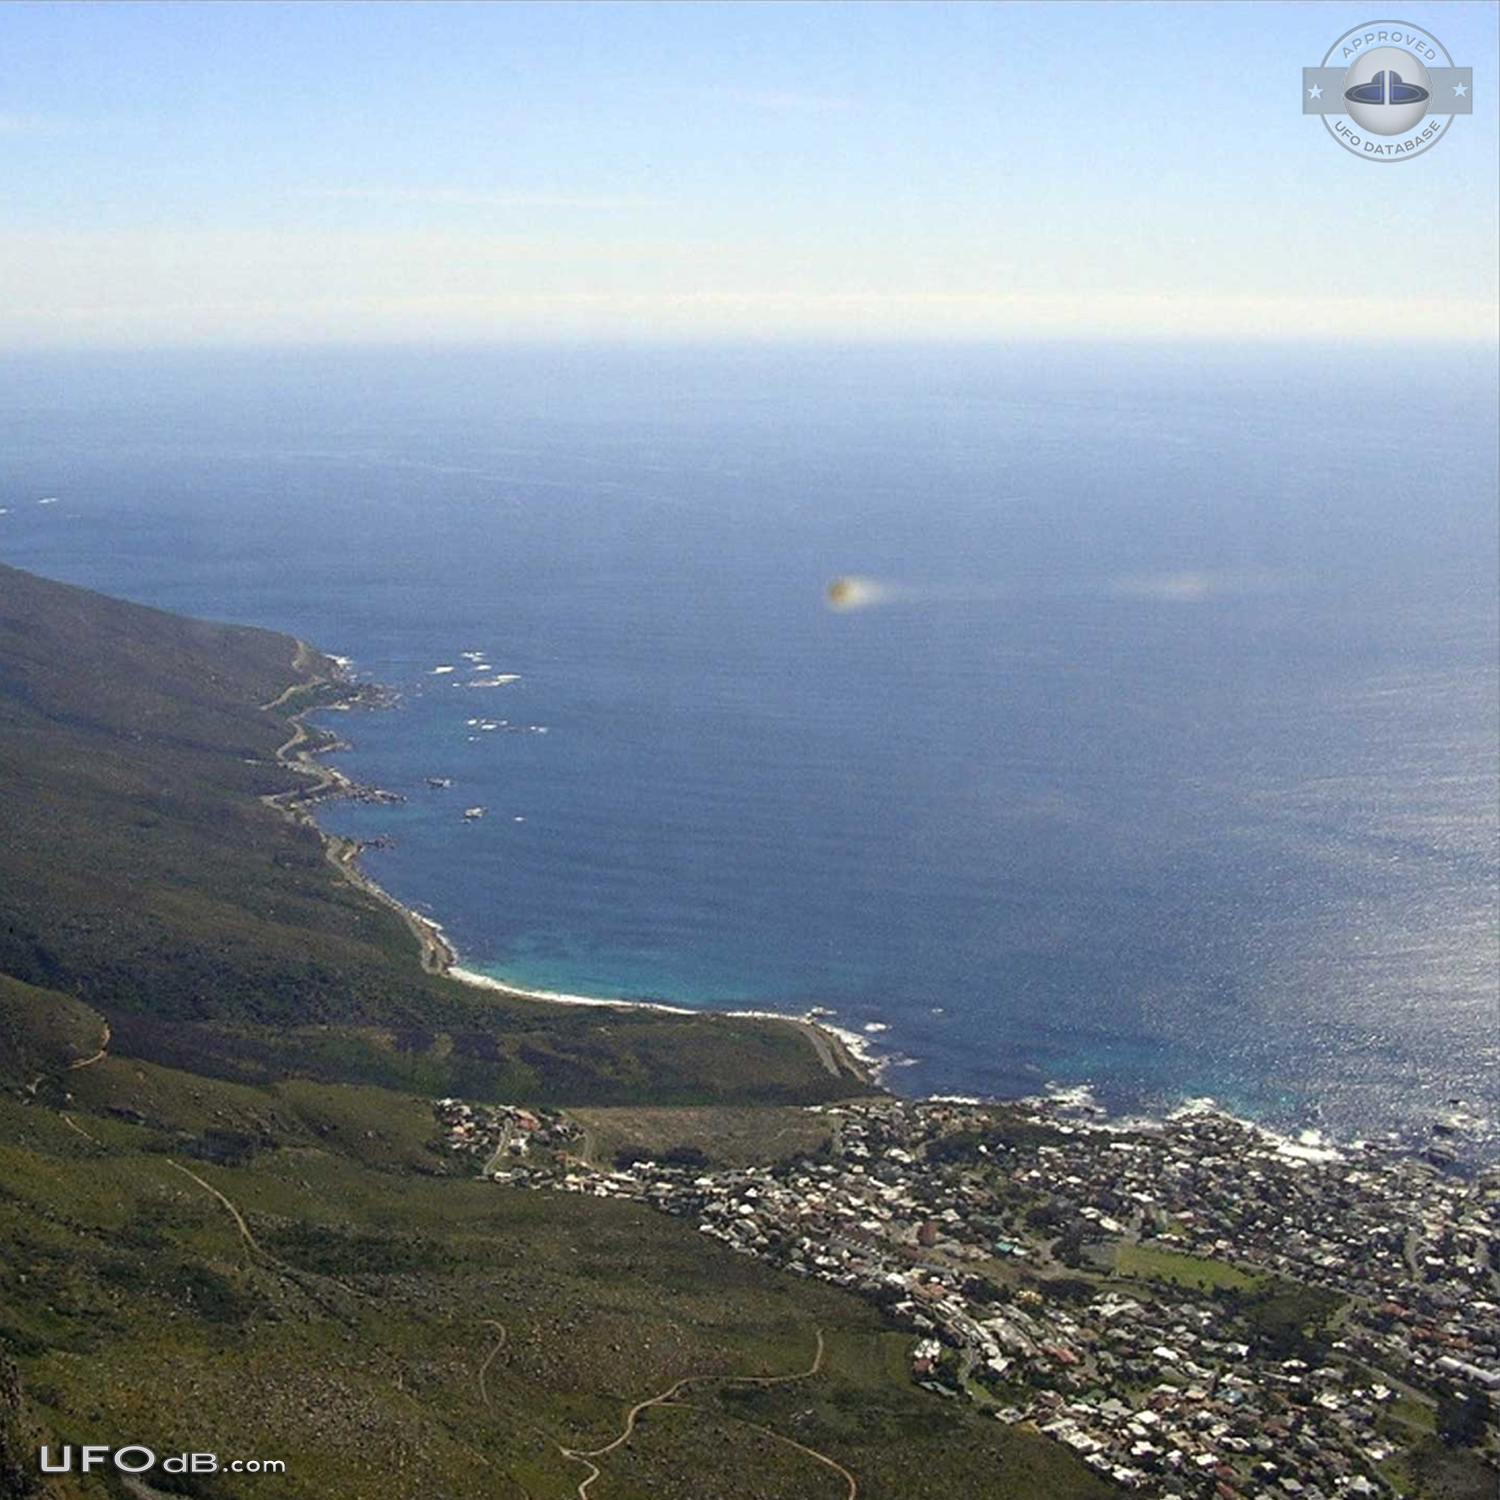 Sphere UFO with smoking tail seen near Table mountain, Cape Town 2004 UFO Picture #456-2